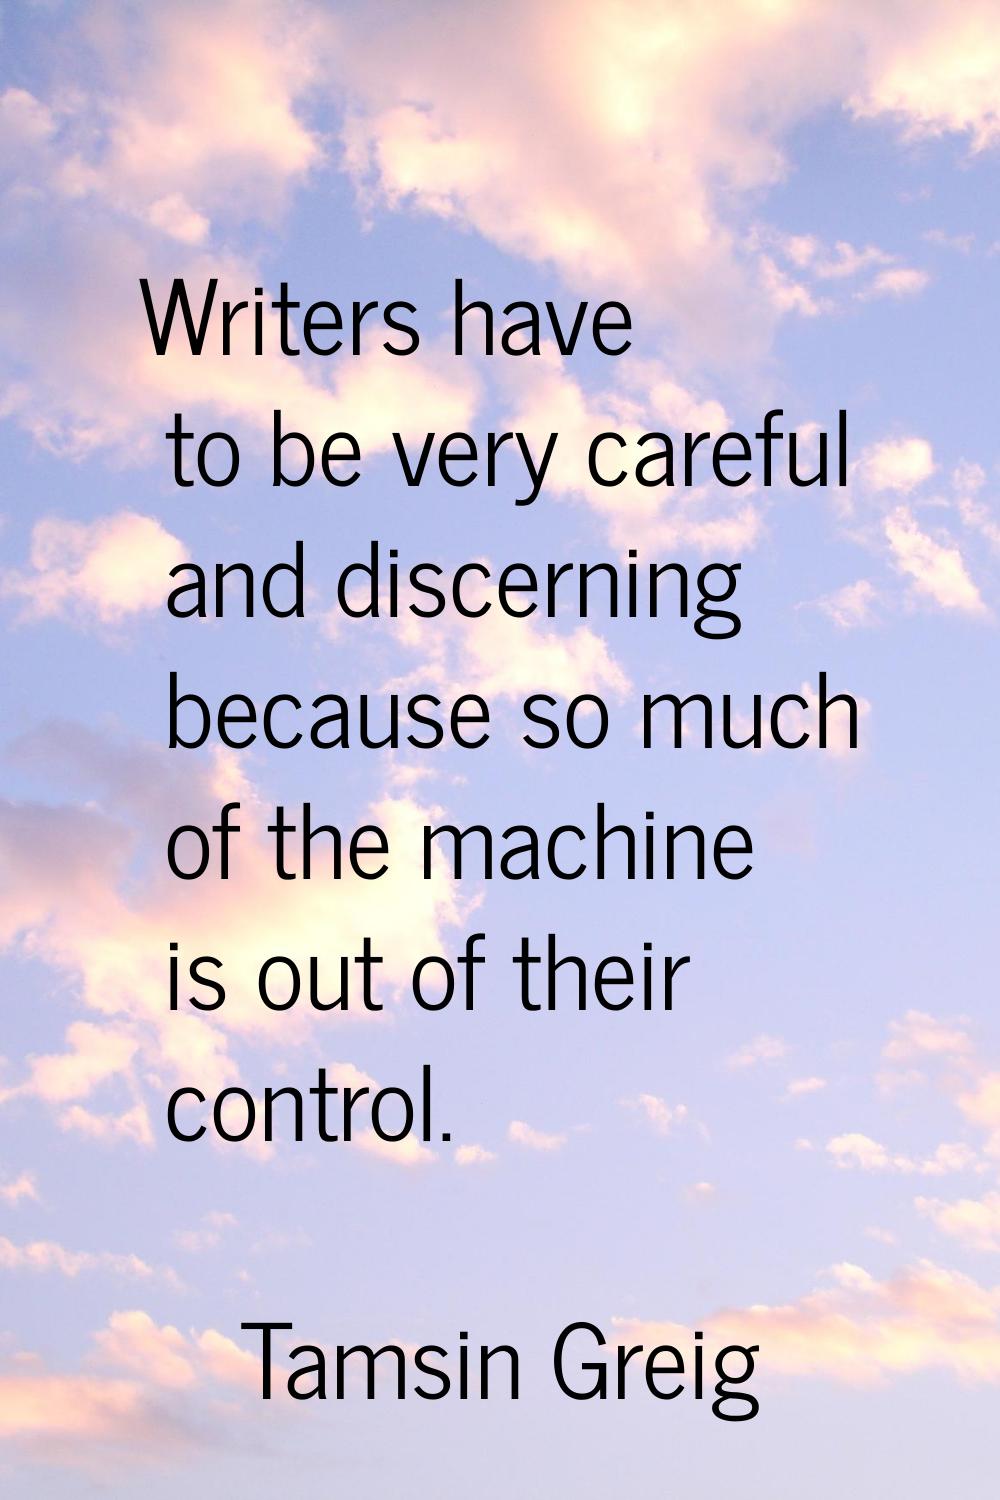 Writers have to be very careful and discerning because so much of the machine is out of their contr